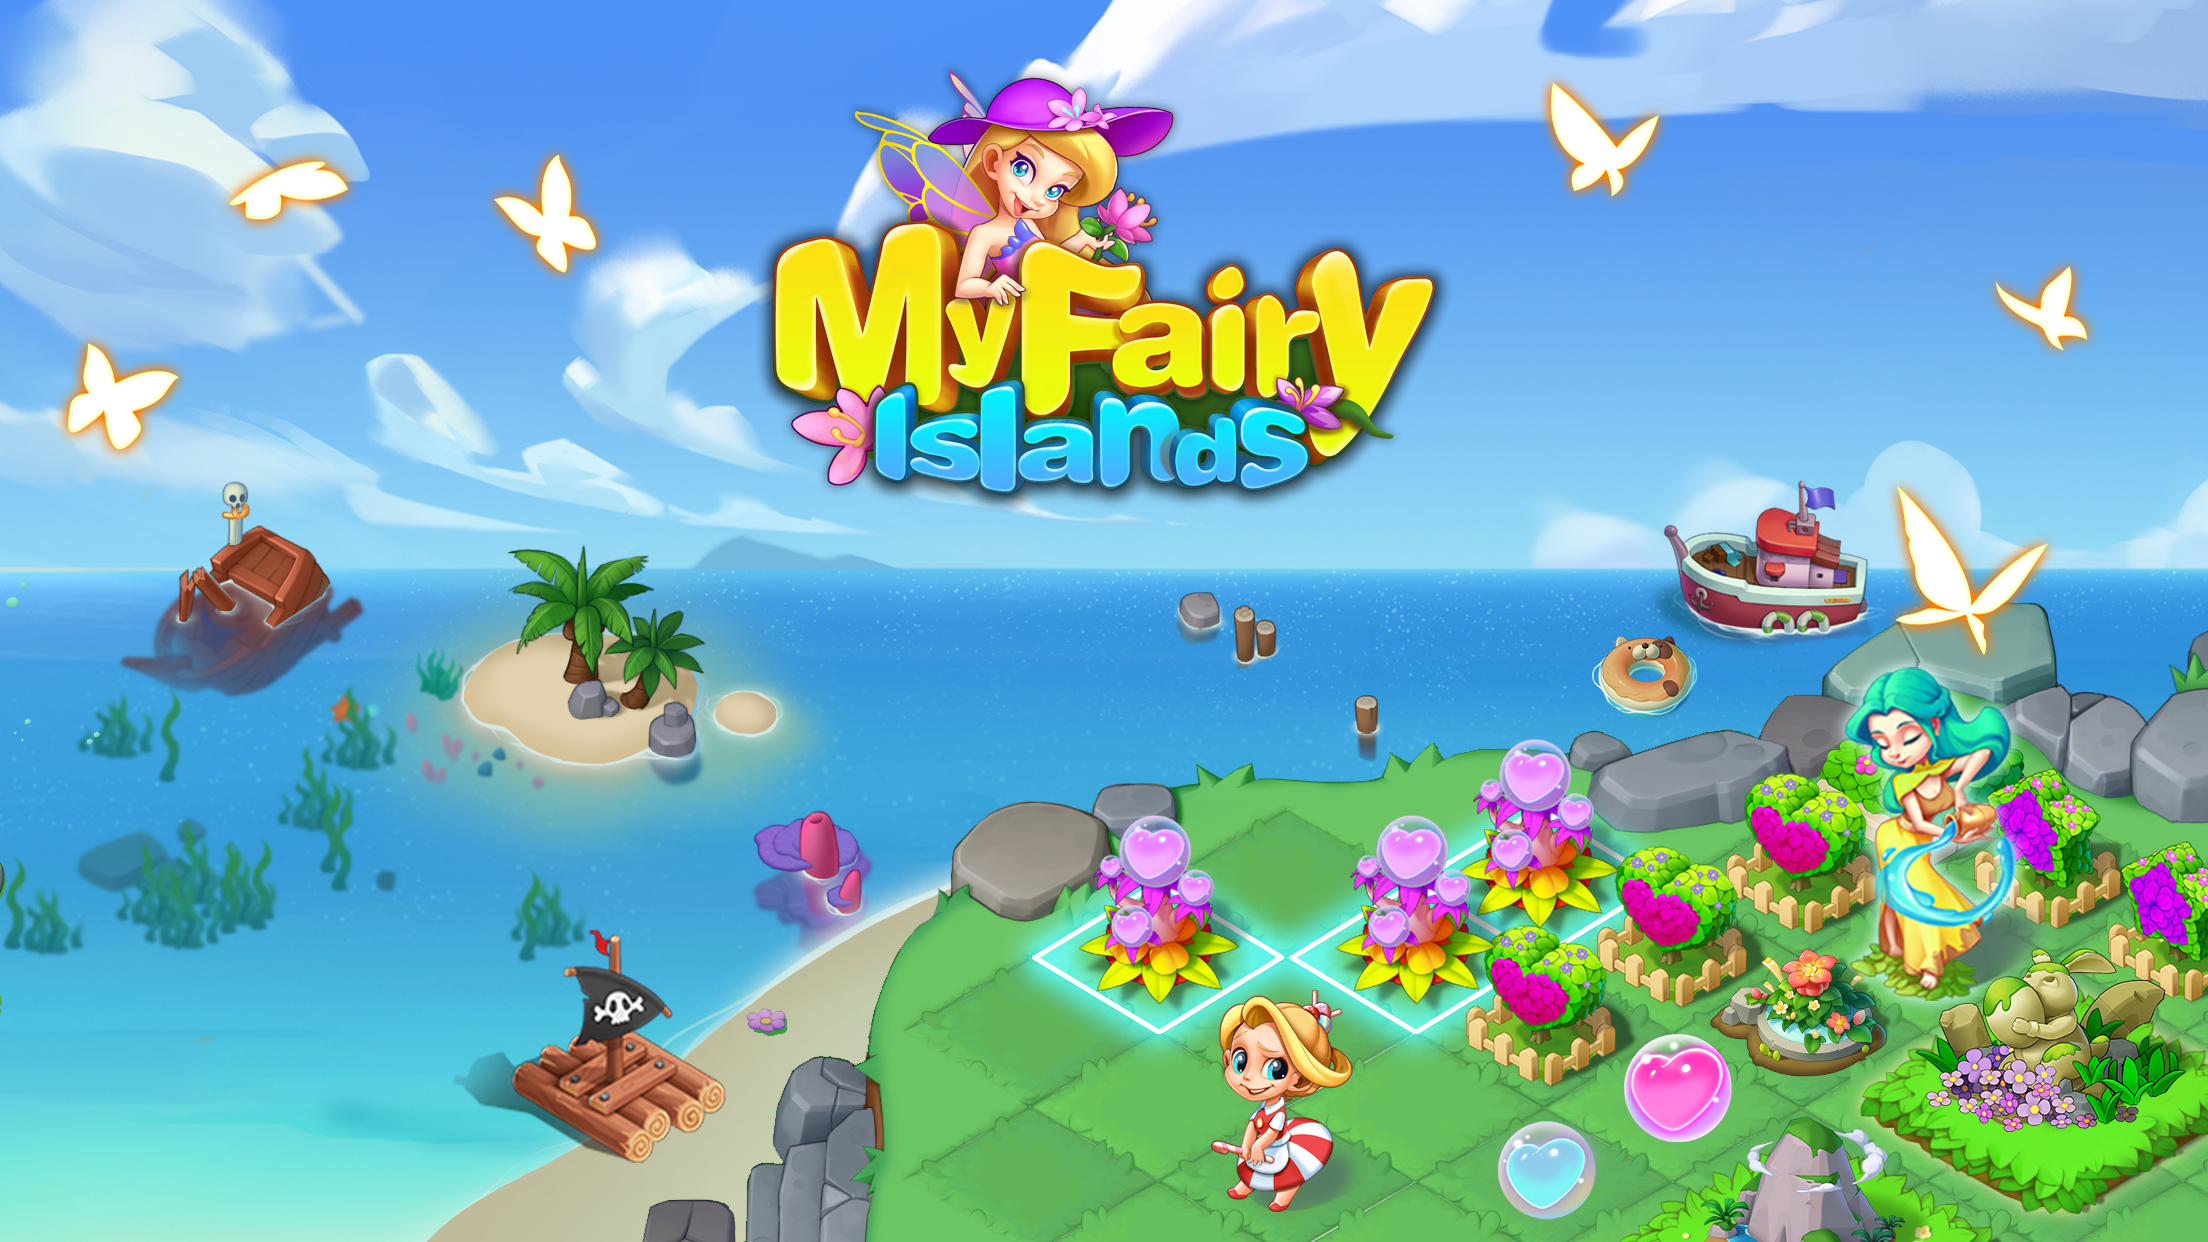 a-new-simulation-game-my-fairy-islands:-merge-animal-starts-open-beta-test-on-android